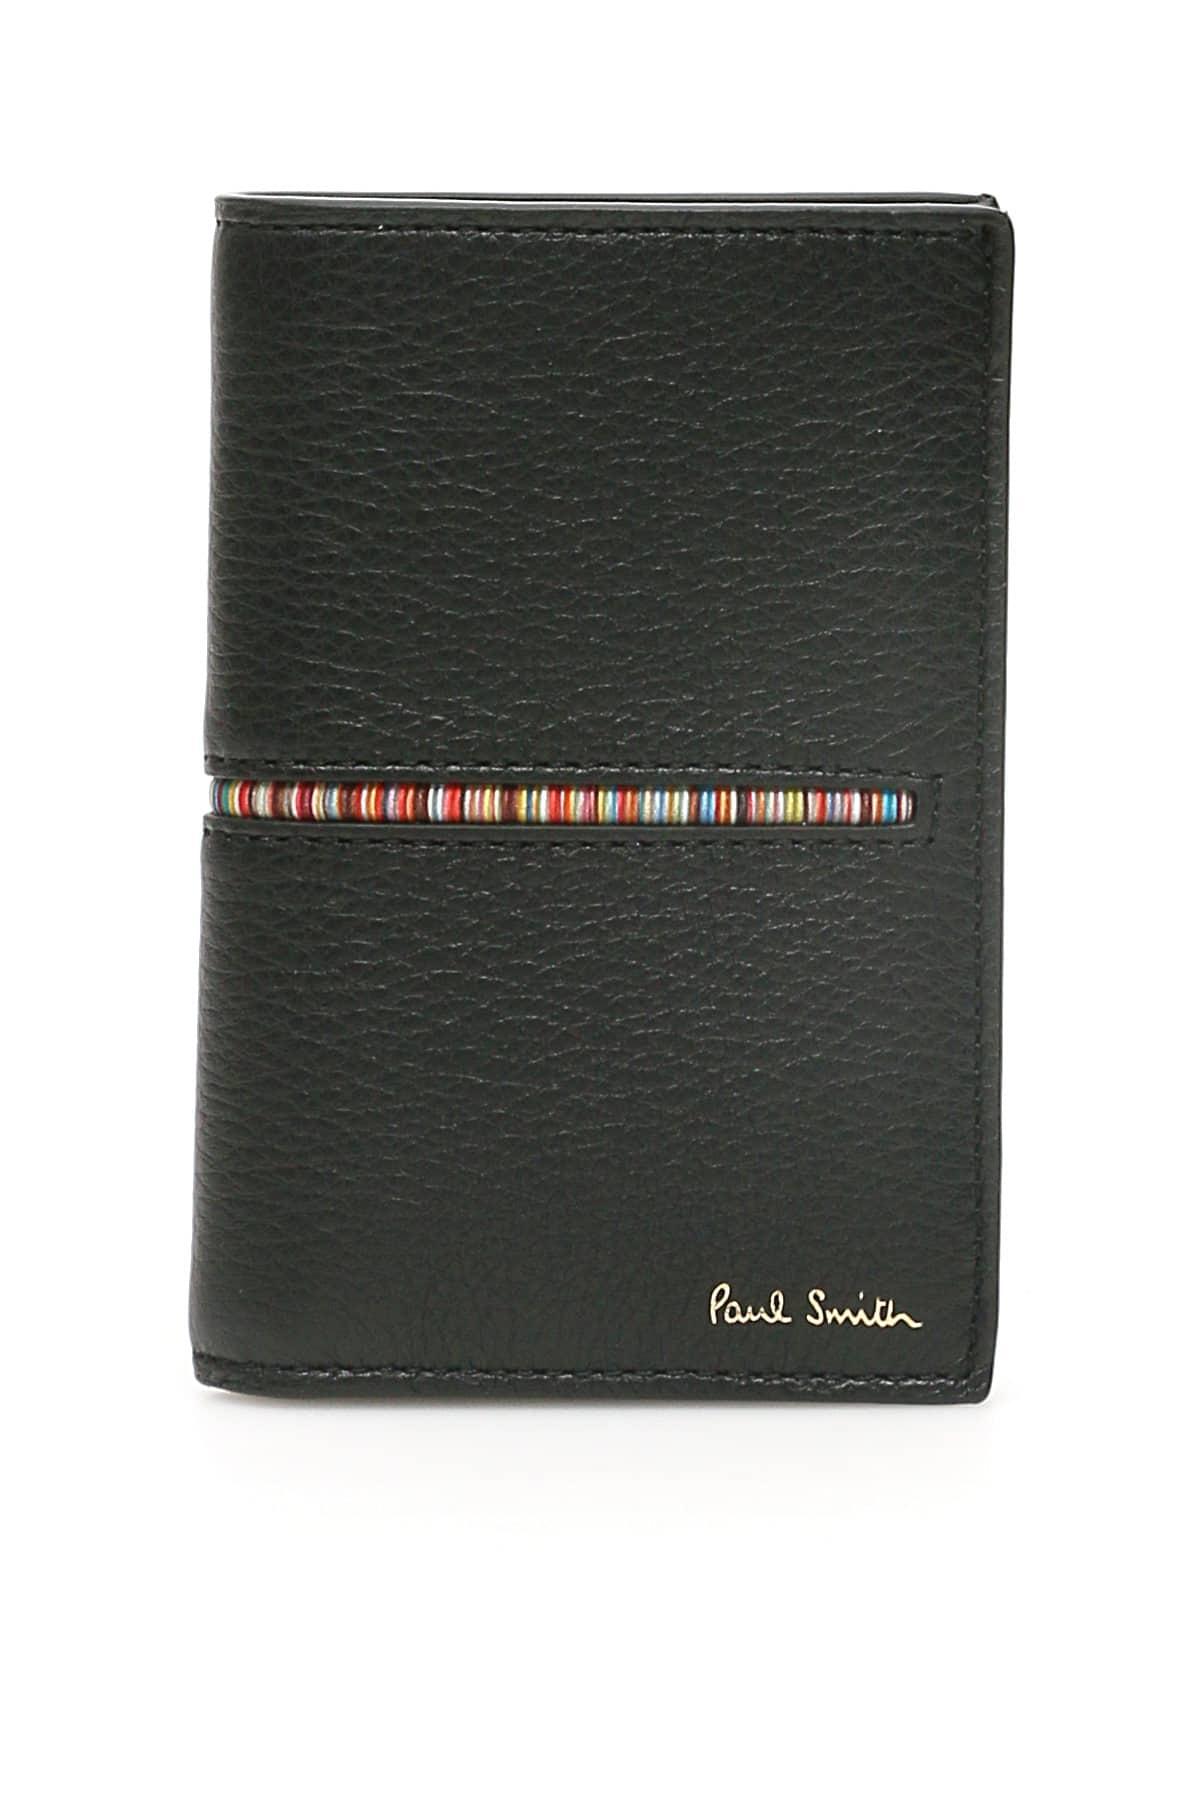 Paul Smith Leather Signature Stripe Bifold Card Holder in Black for Men - Lyst